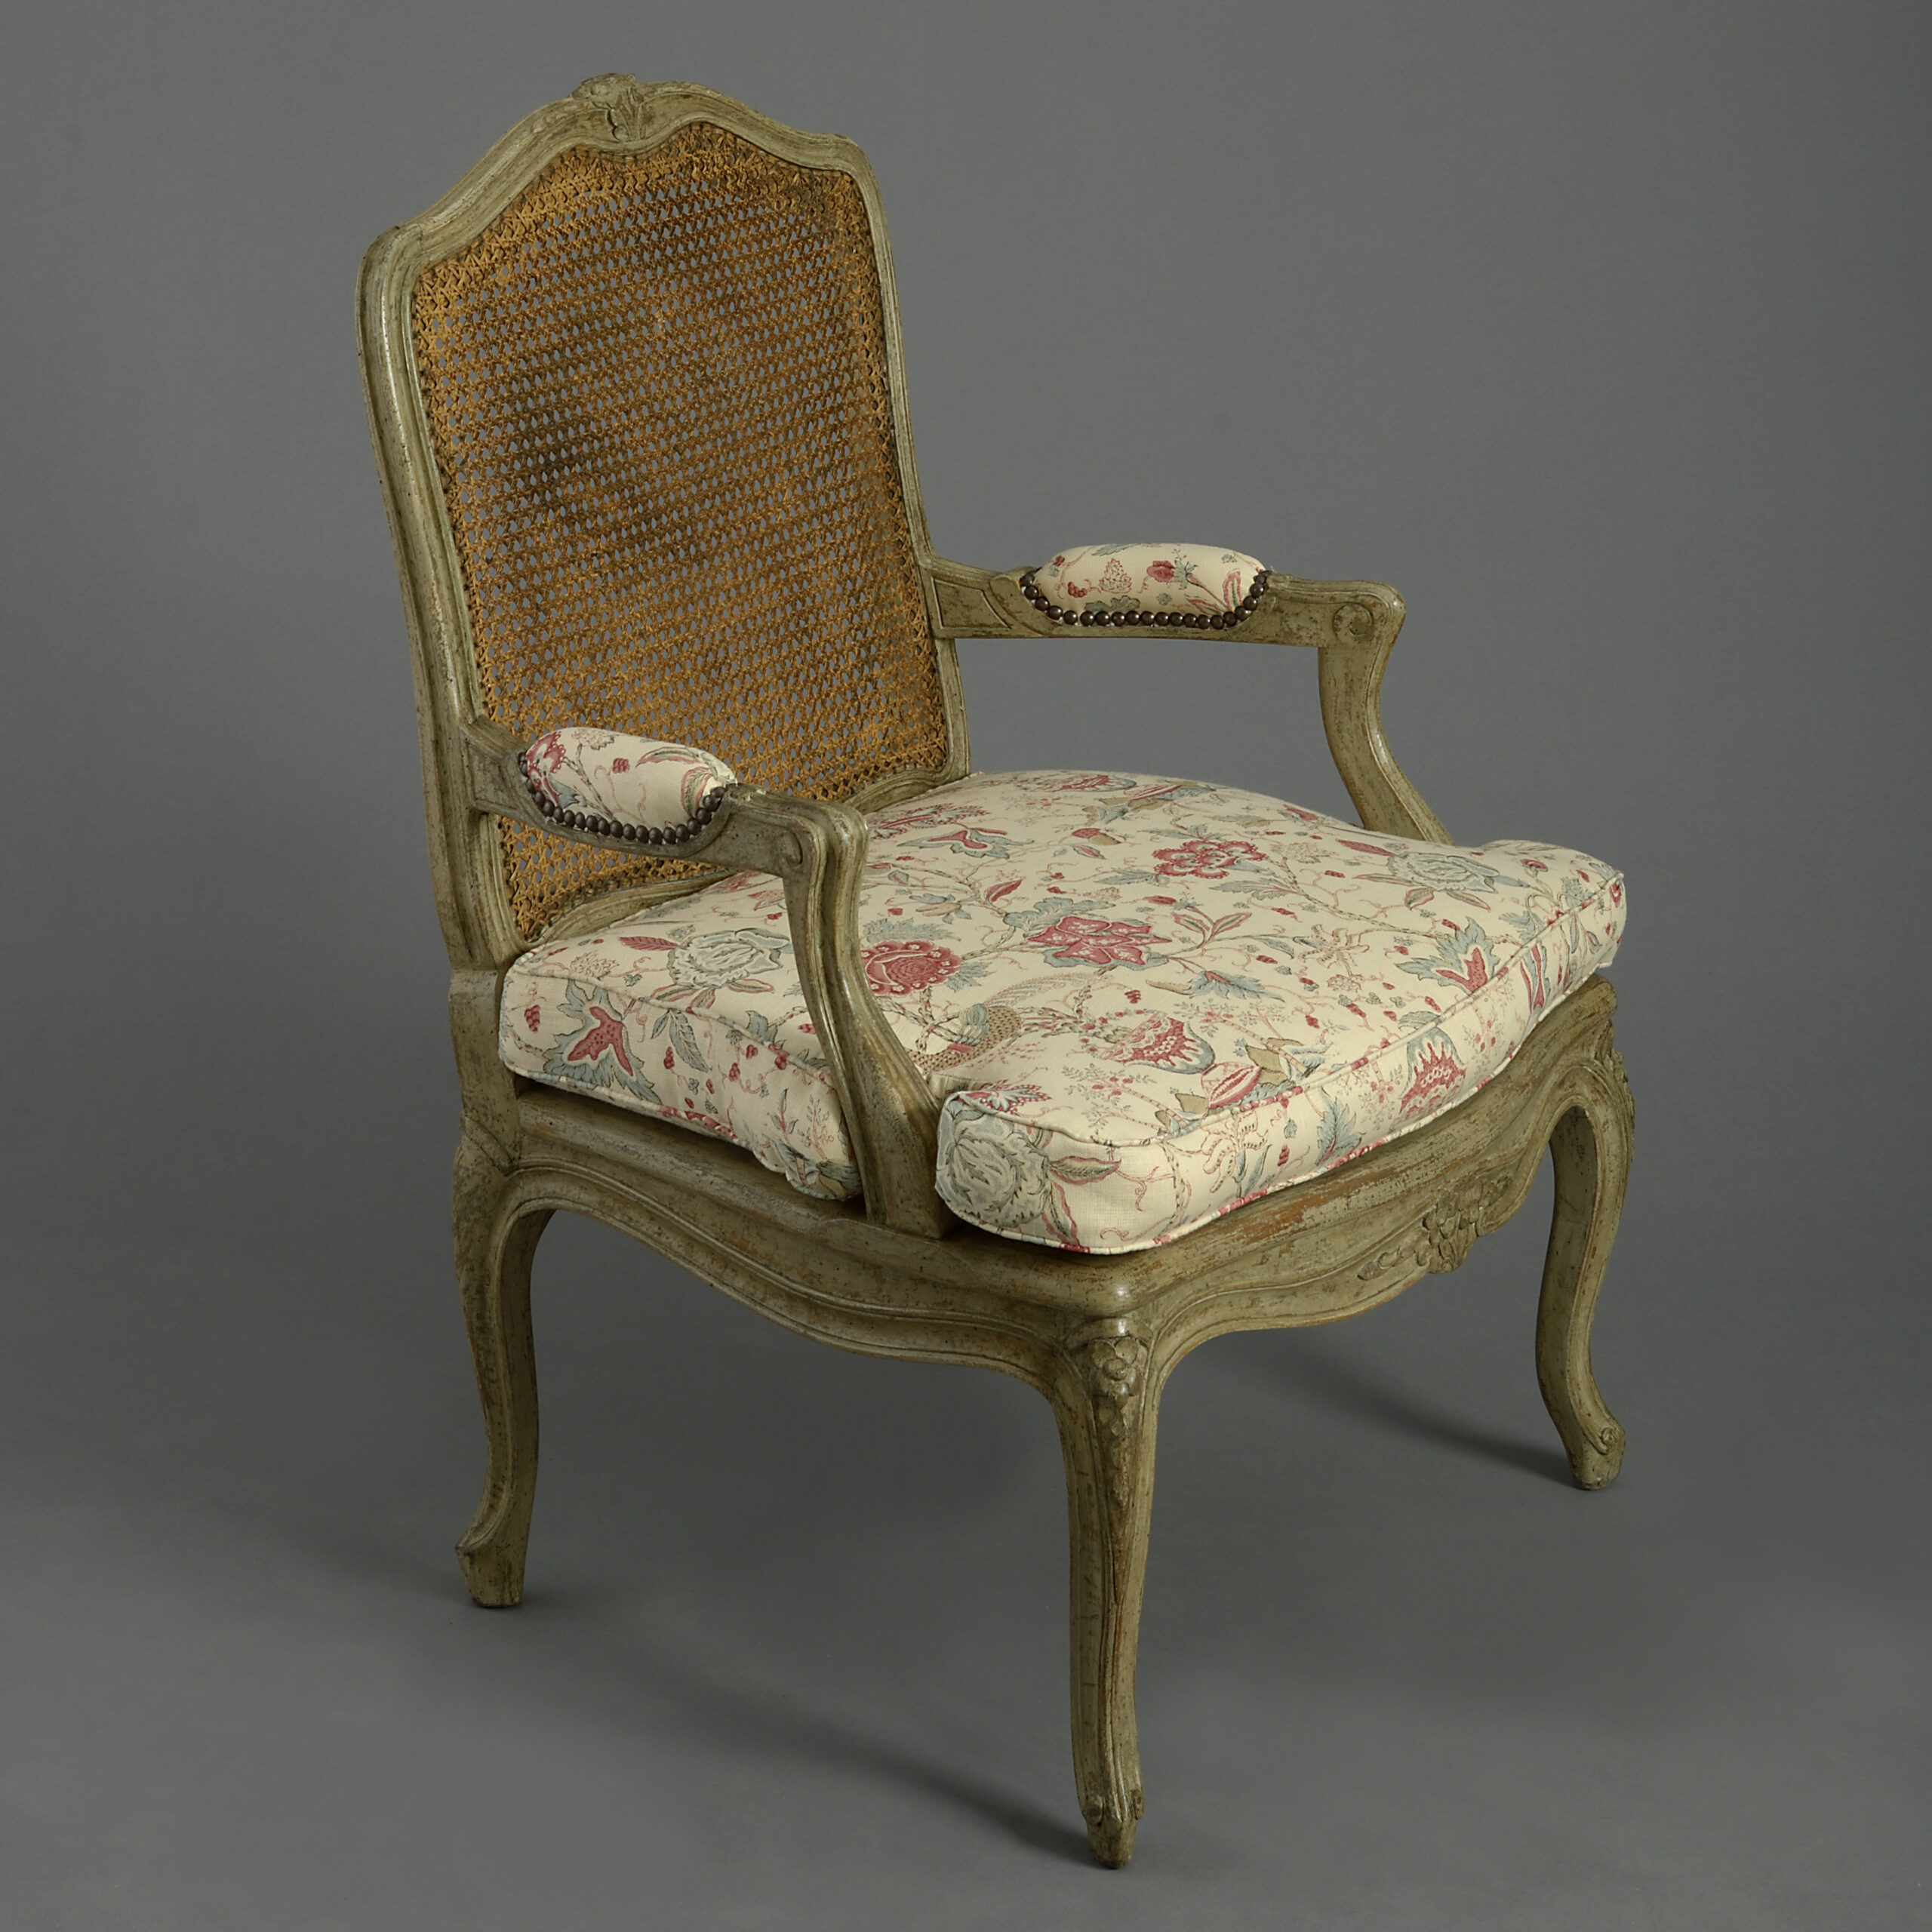 A rococo/Louis XV armchair, second half of the 18th century. - Bukowskis